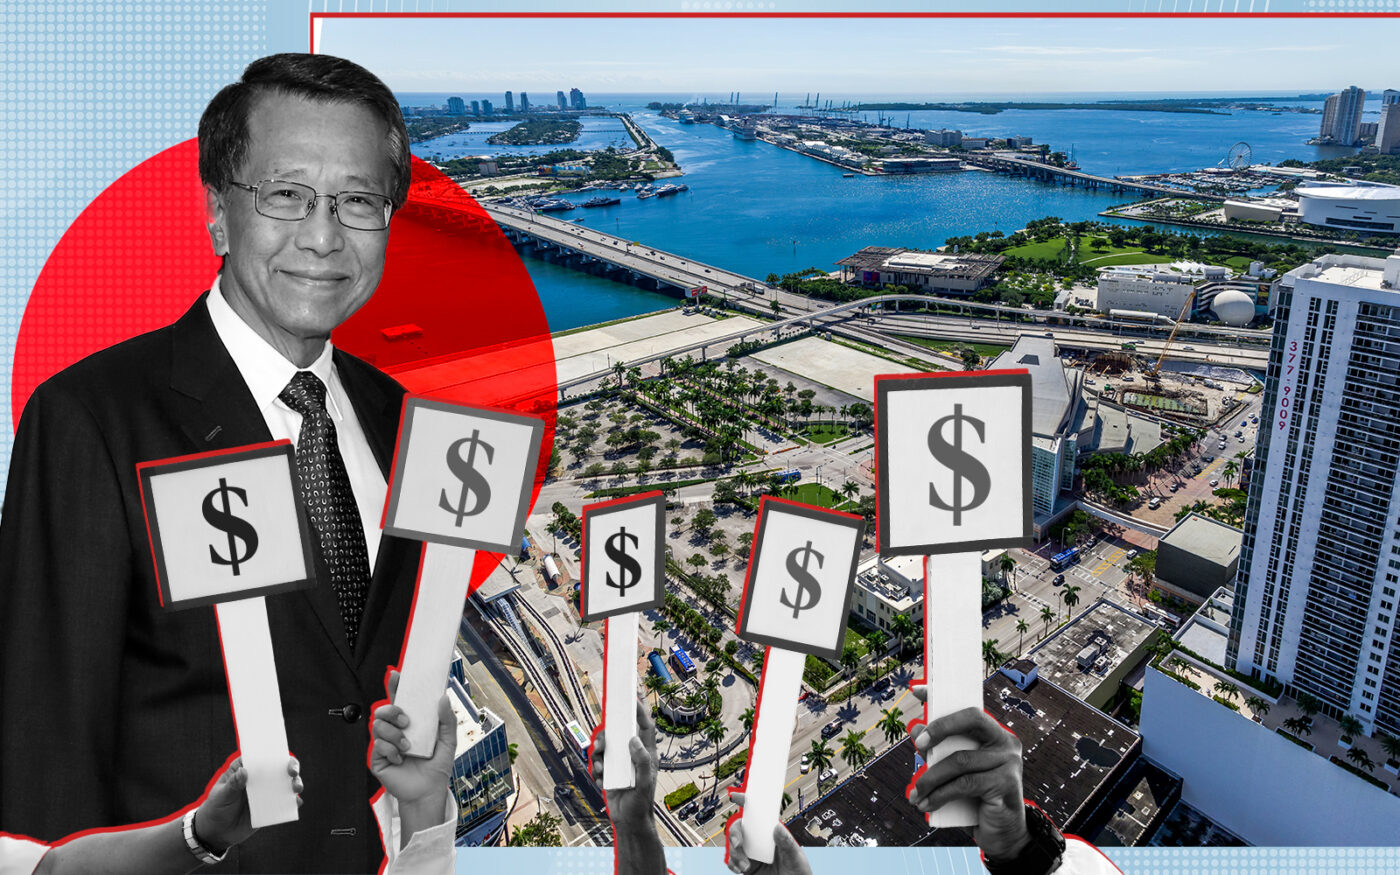 Genting CEO Lim Kok Thay and the downtown Miami site at 1431 North Bayshore Drive in downtown Miami’s Arts & Entertainment District with bidding hands